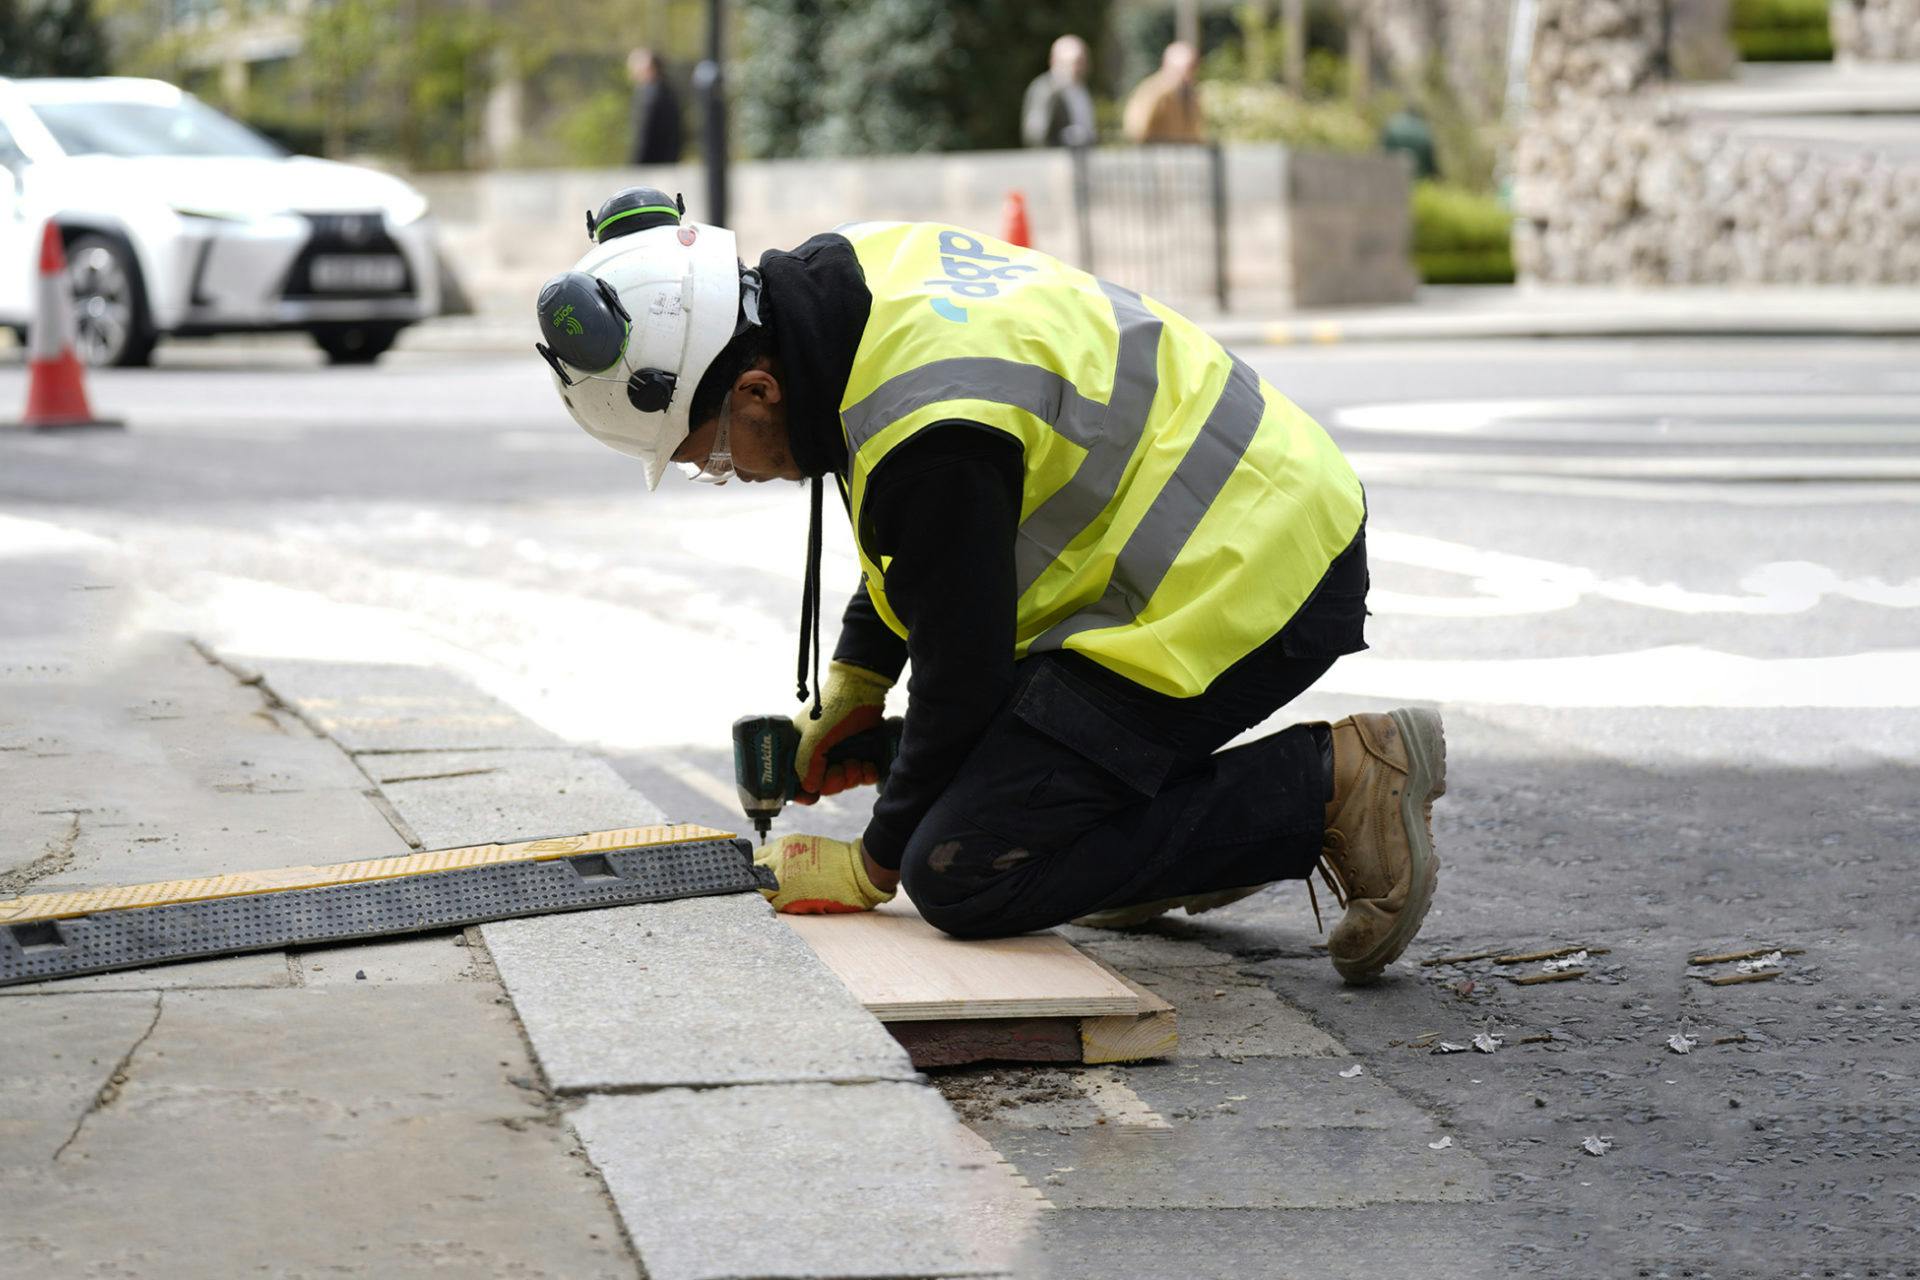 Construction worker in PPE securing a cable ramp to the pavement